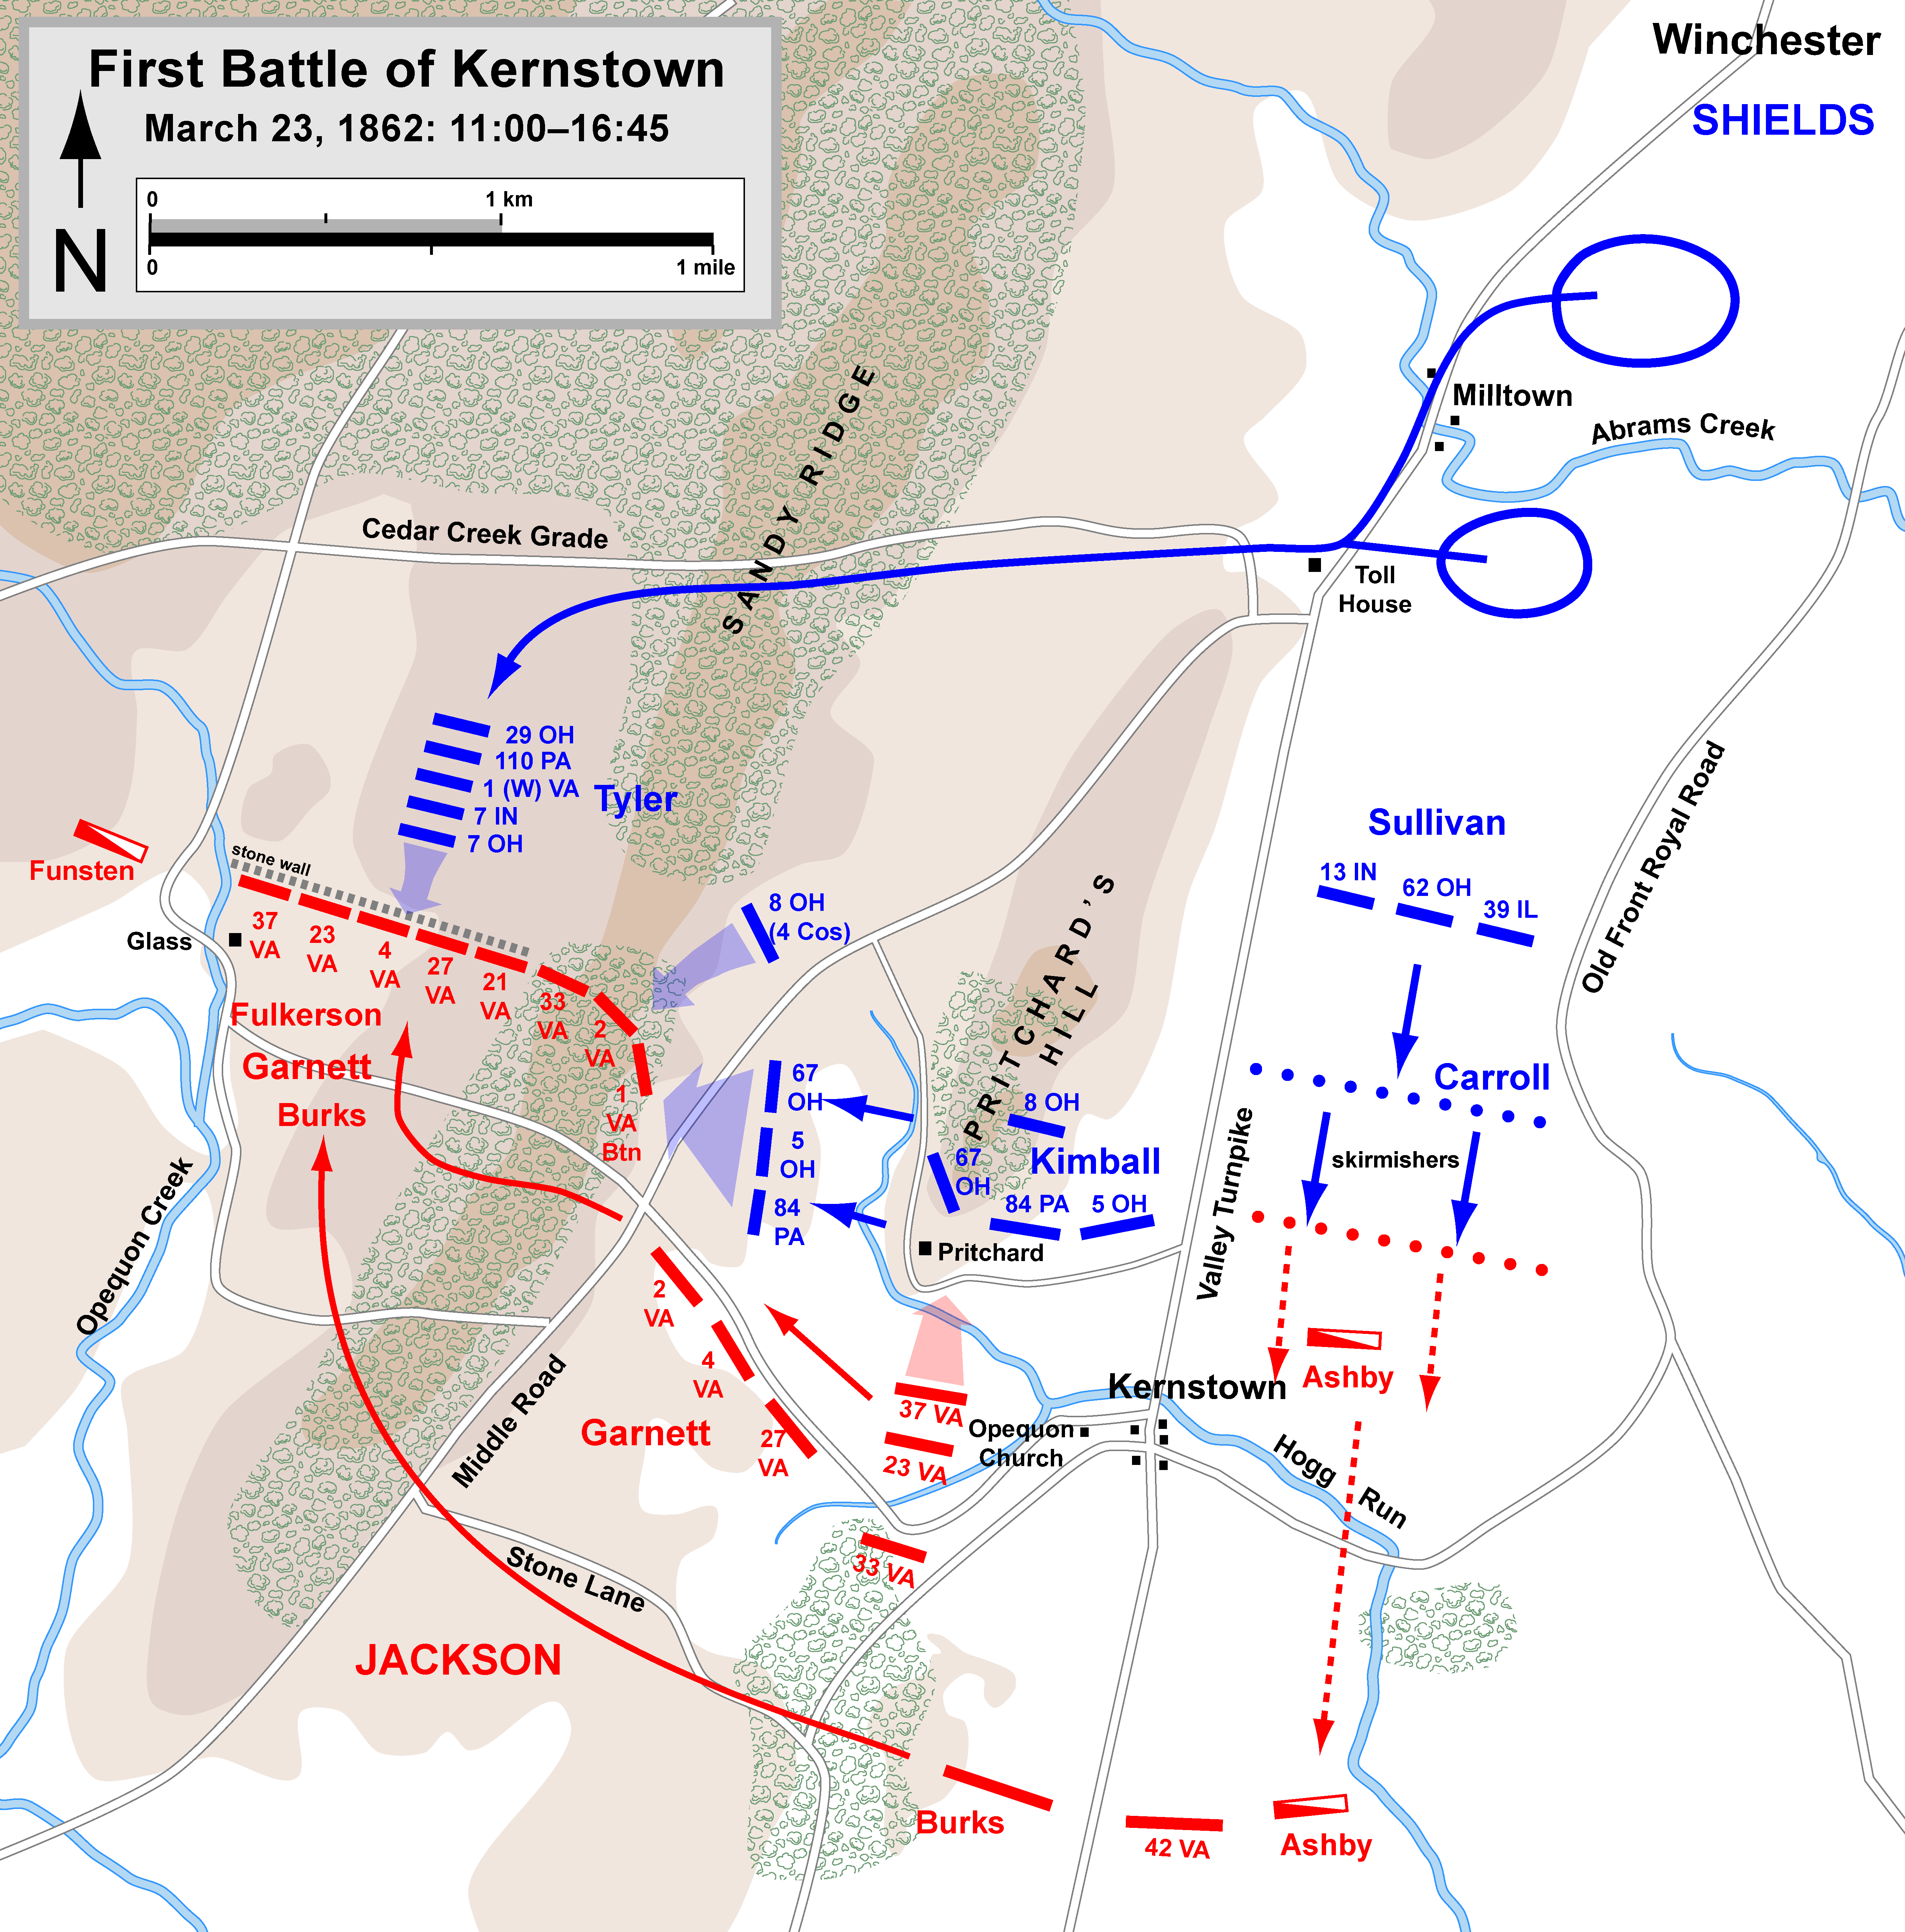 A map depicts troop movements during a Civil War battle.